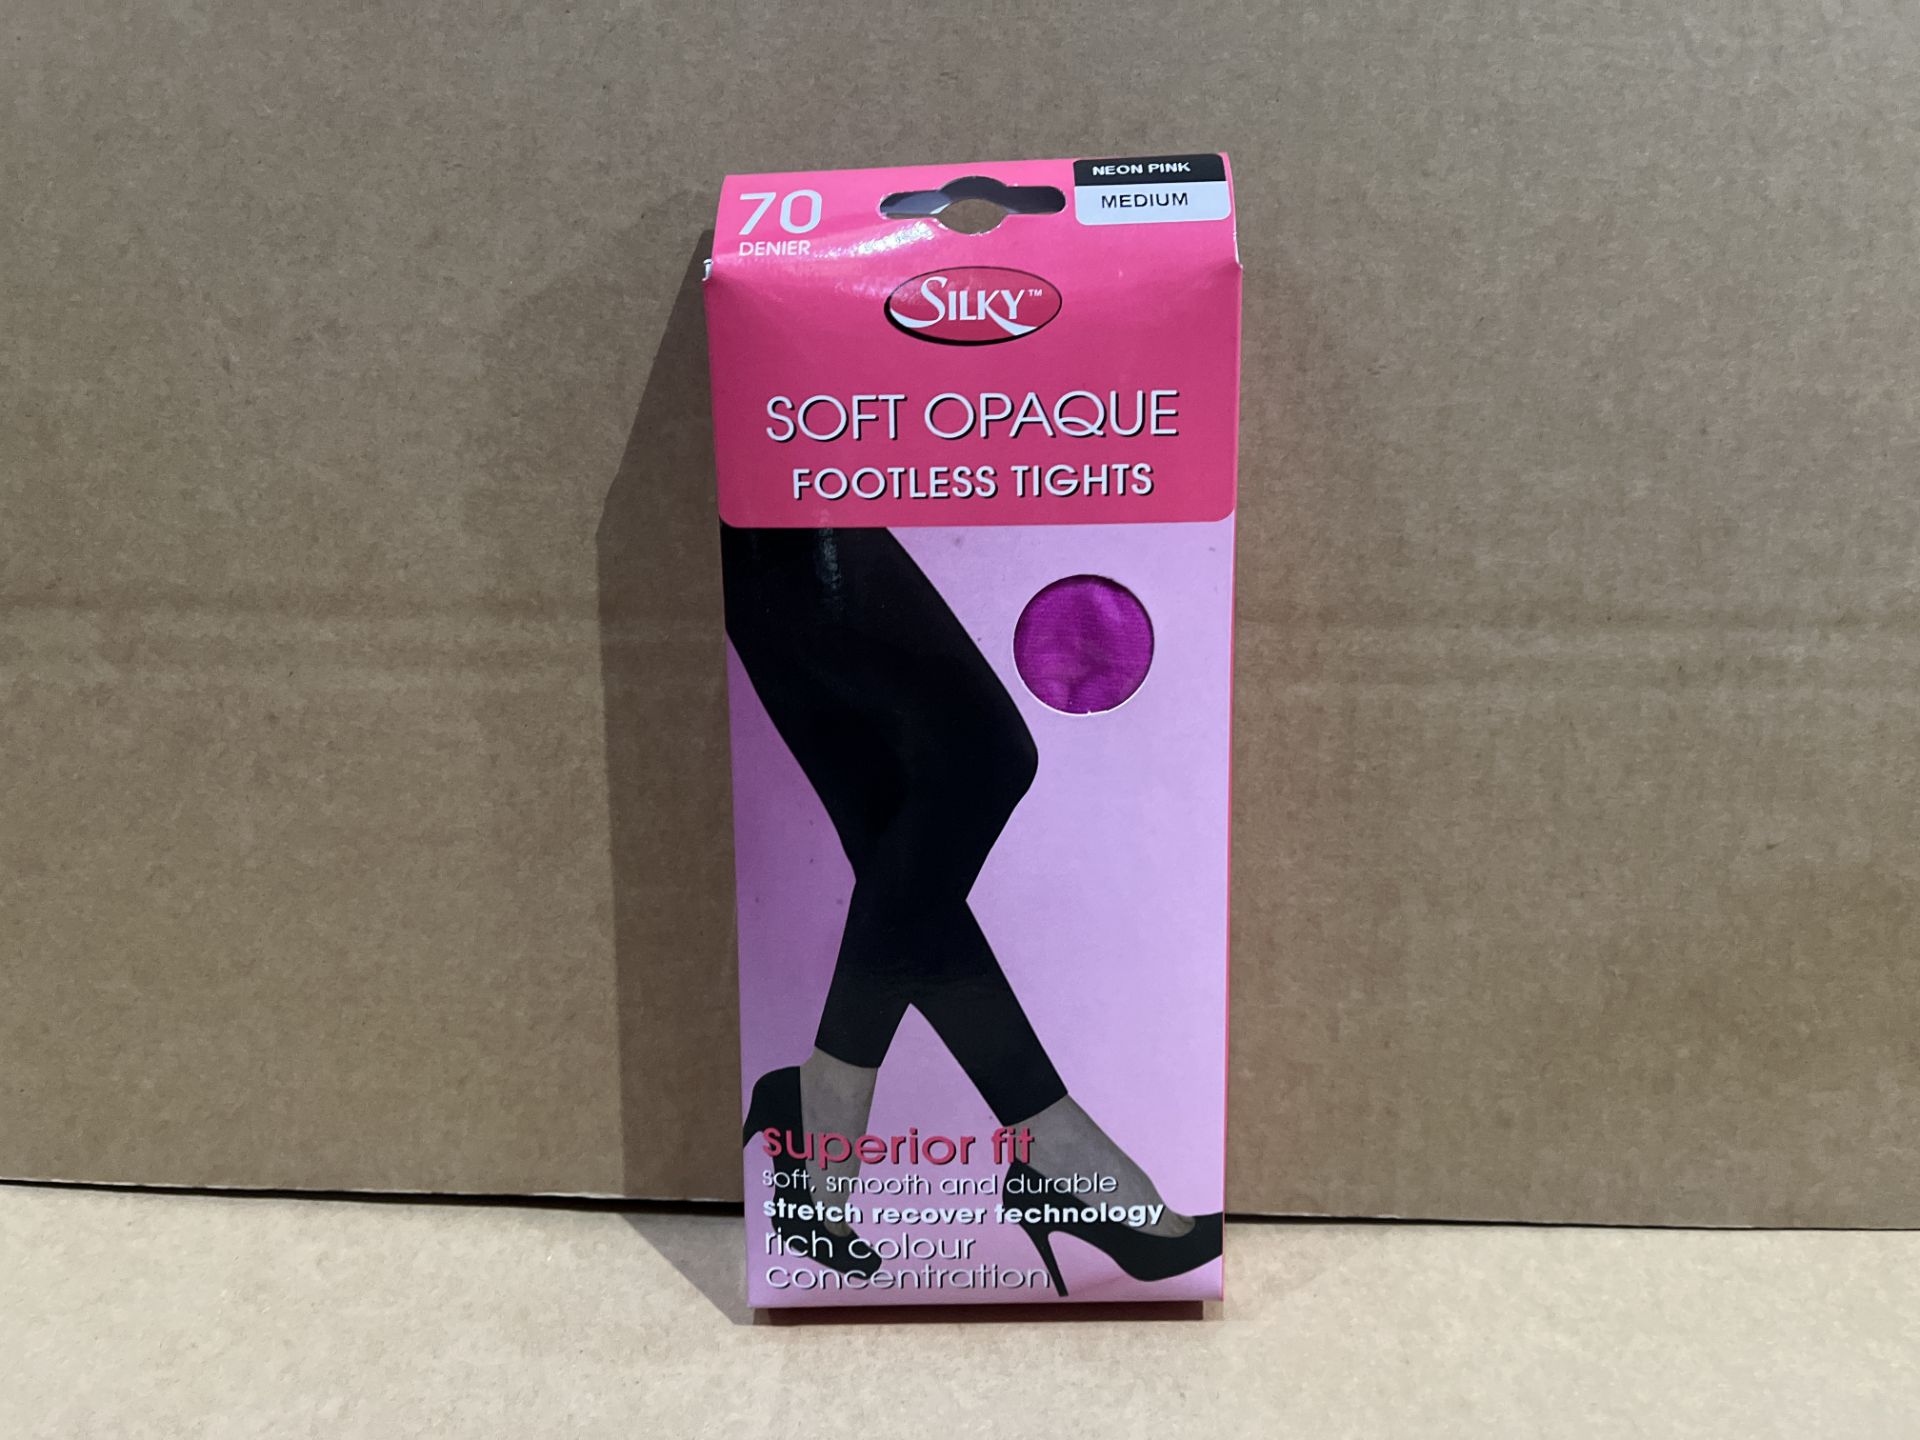 120 X BRAND NEW SILKY SOFT OPAQUE FOOTLESS TIGHTS 70 DENIER NEON PINK R9